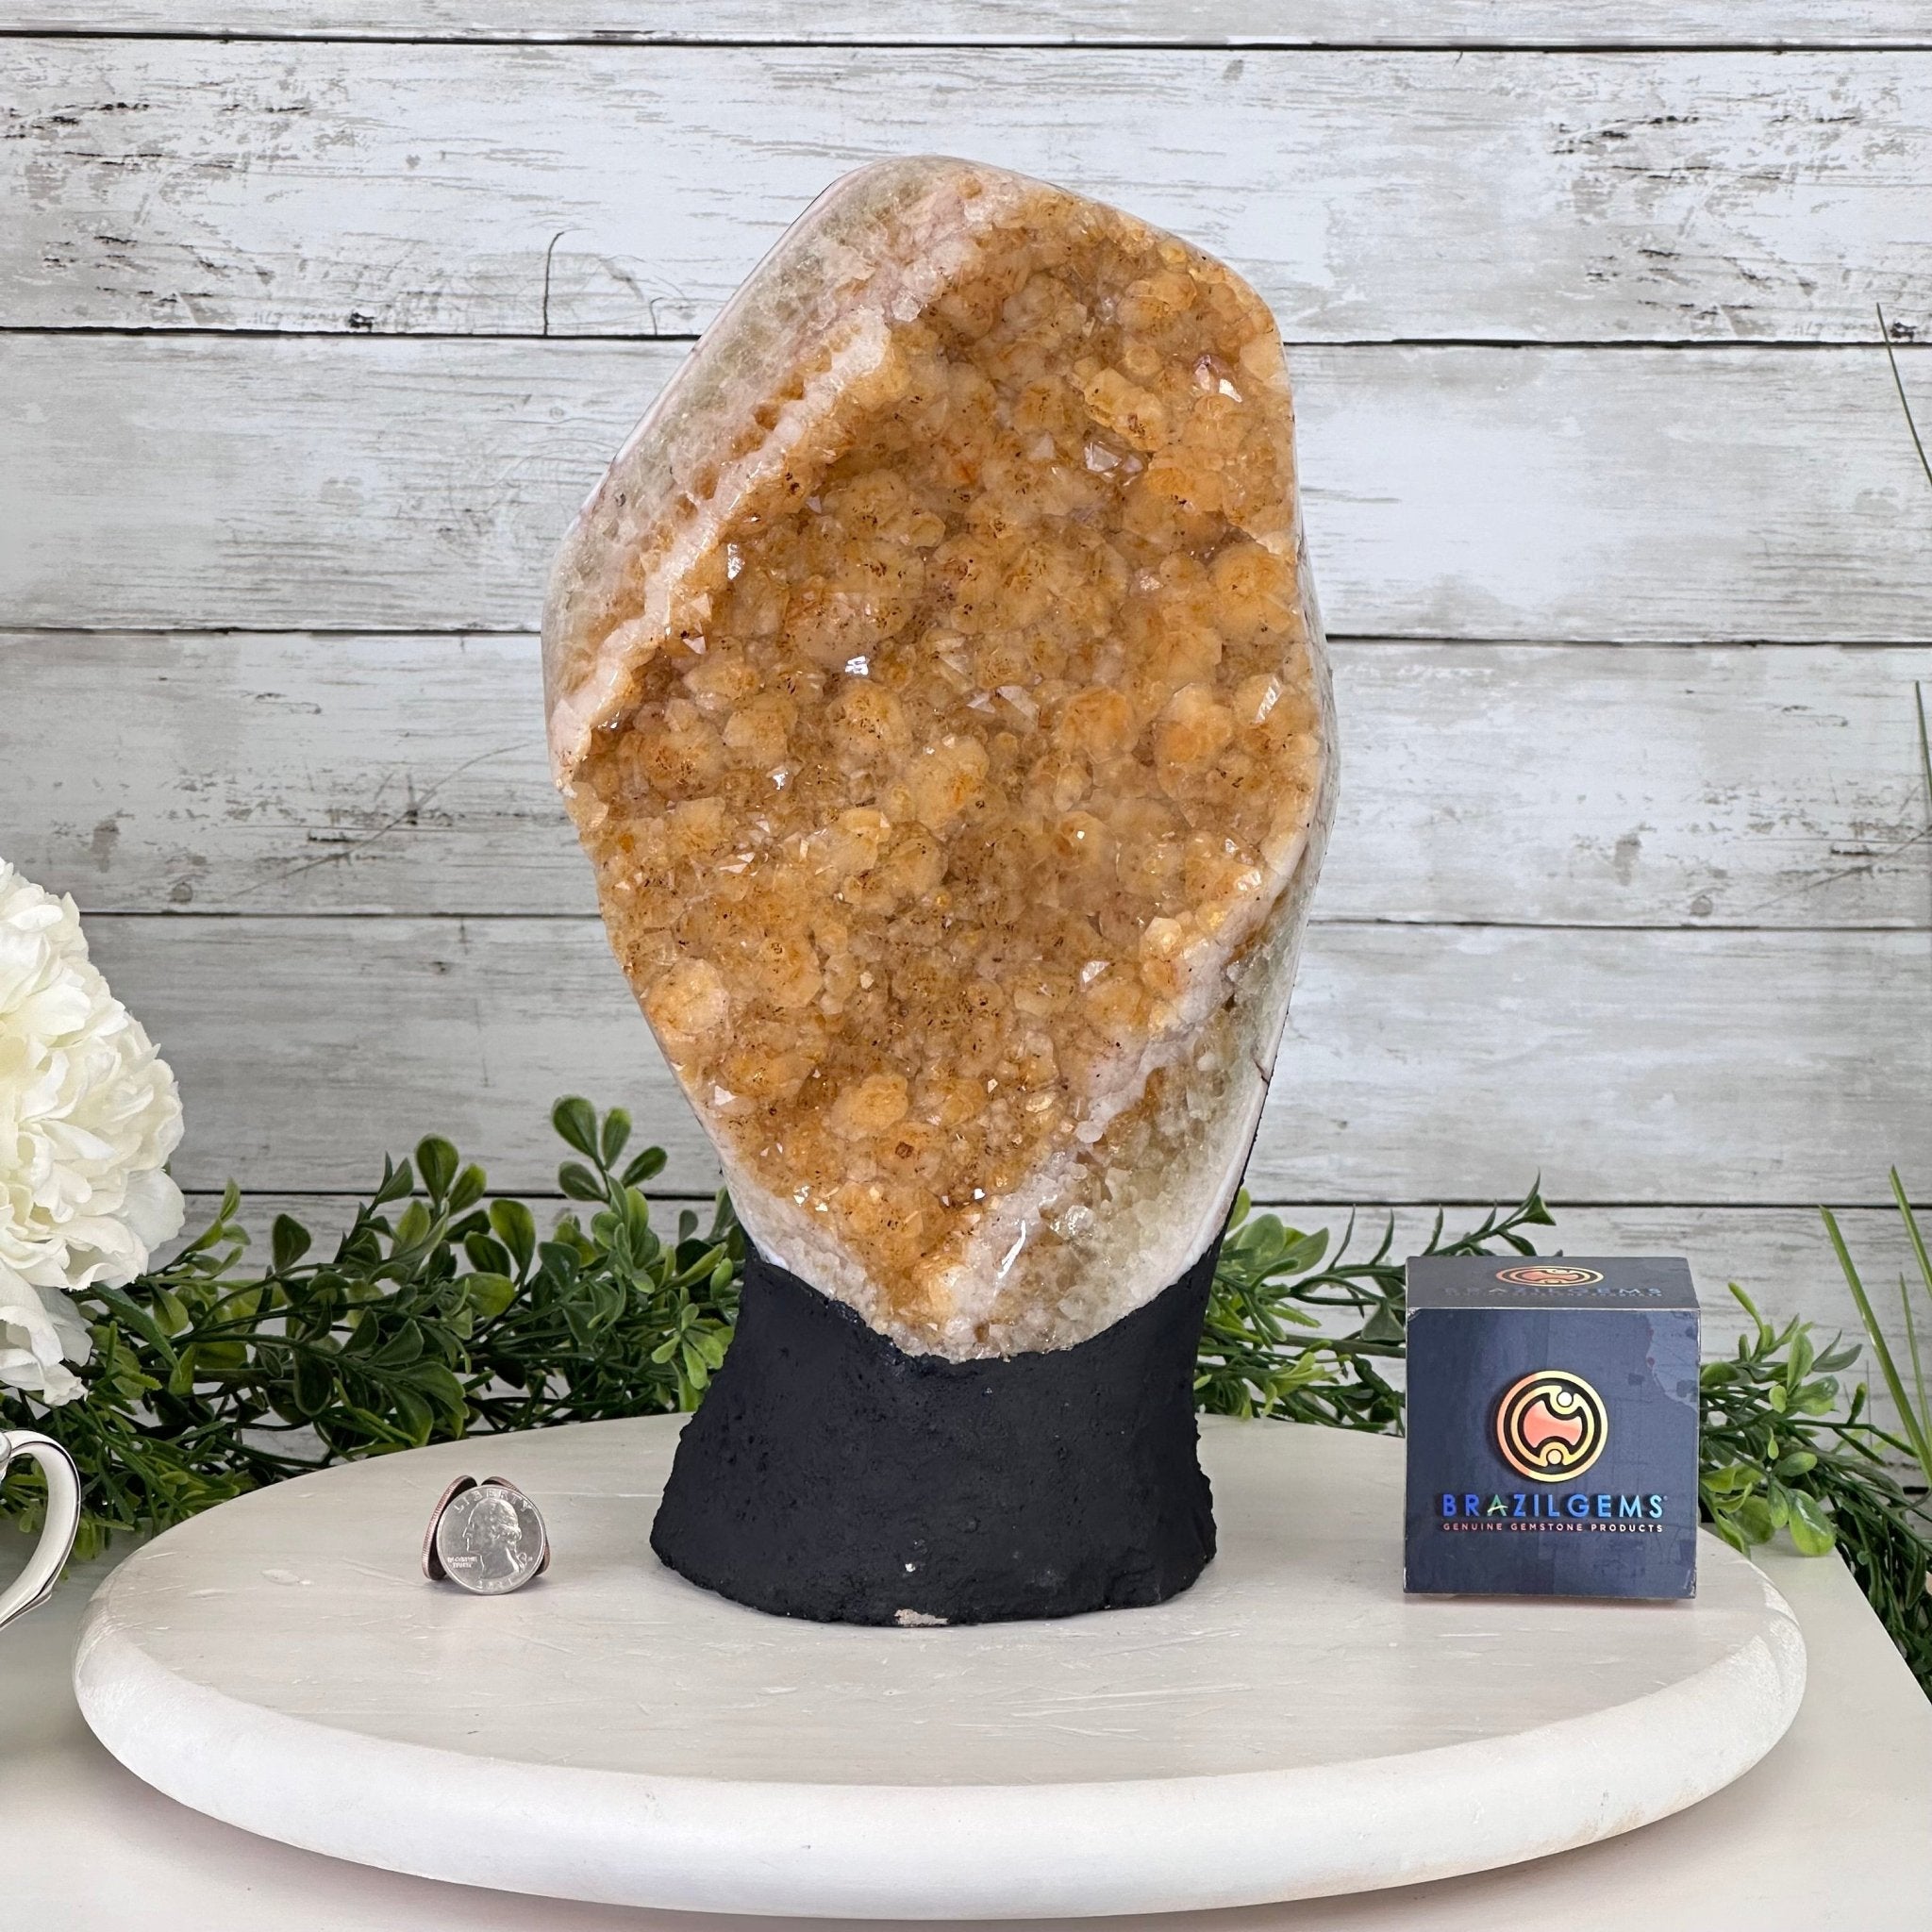 Extra Quality Citrine Cluster, Cement Base, 12.25" Tall #5615-0038 - Brazil GemsBrazil GemsExtra Quality Citrine Cluster, Cement Base, 12.25" Tall #5615-0038Clusters on Cement Bases5615-0038